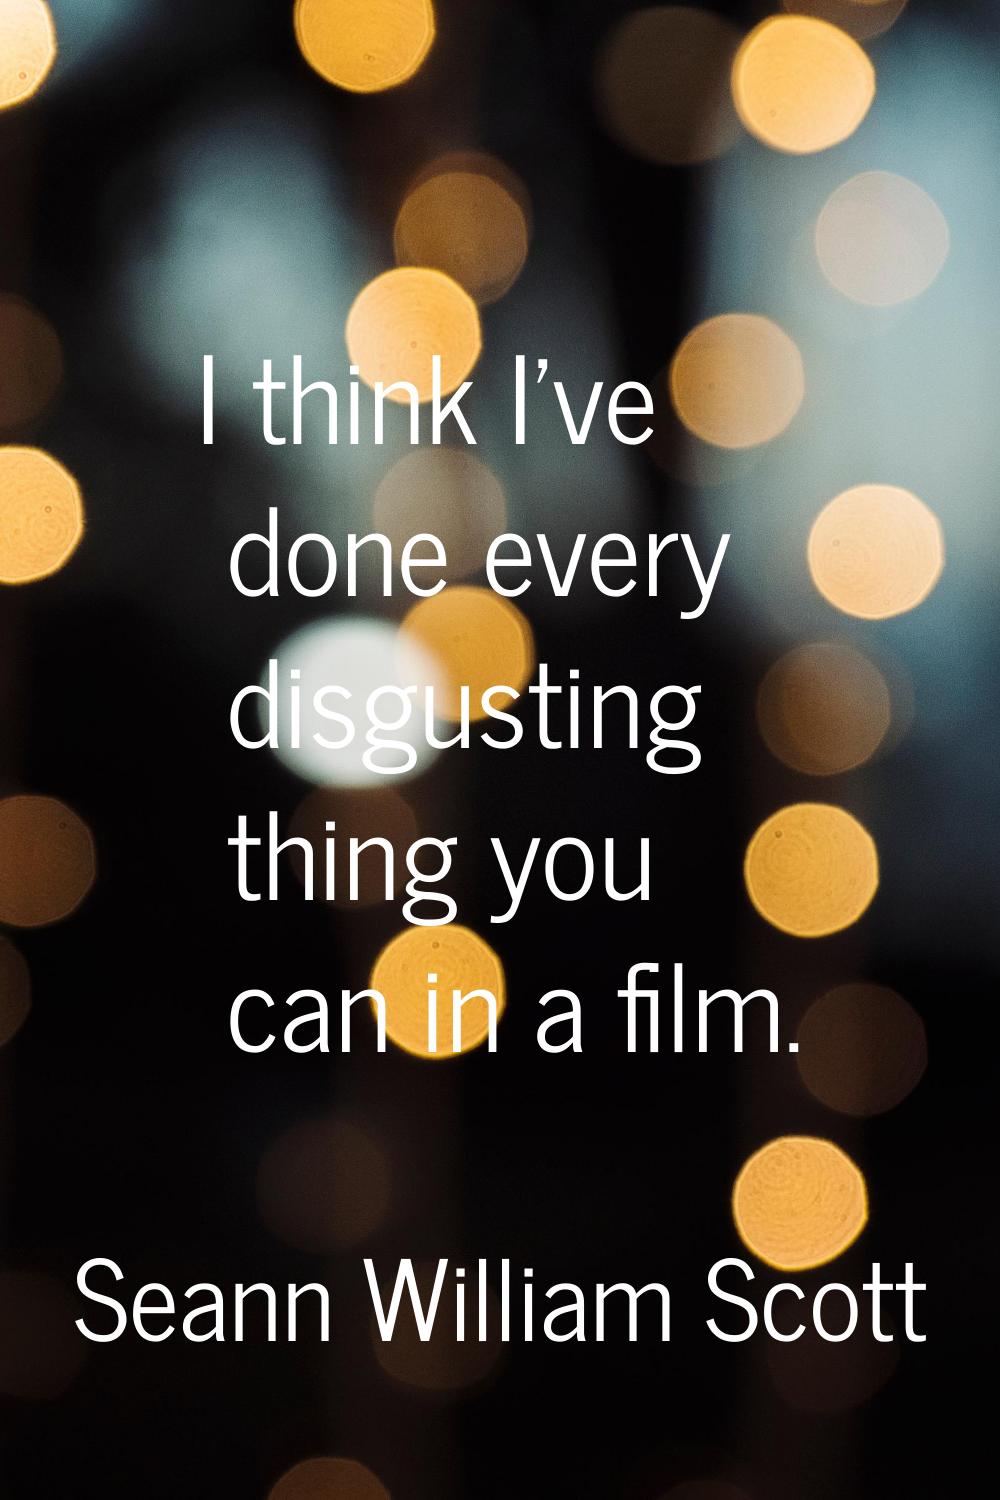 I think I've done every disgusting thing you can in a film.